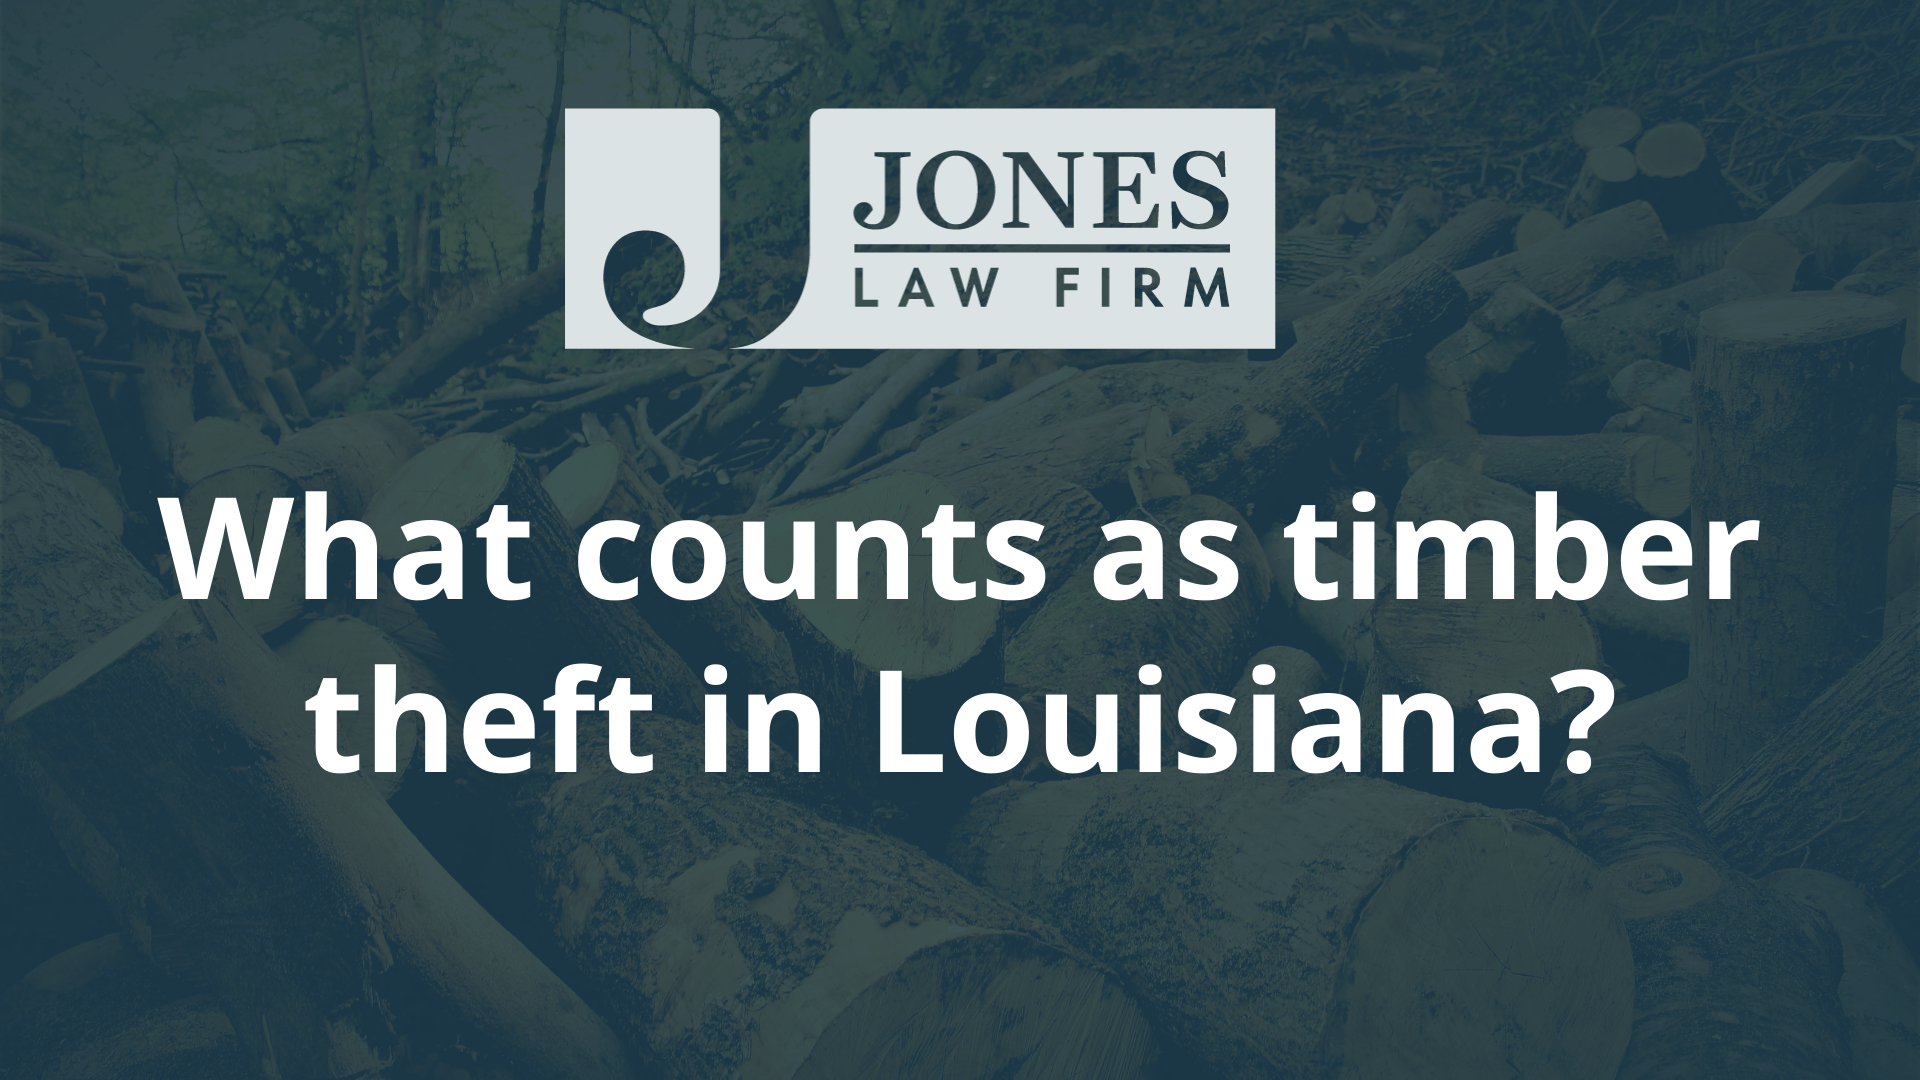 What counts as timber theft in Louisiana - jones law firm - louisiana